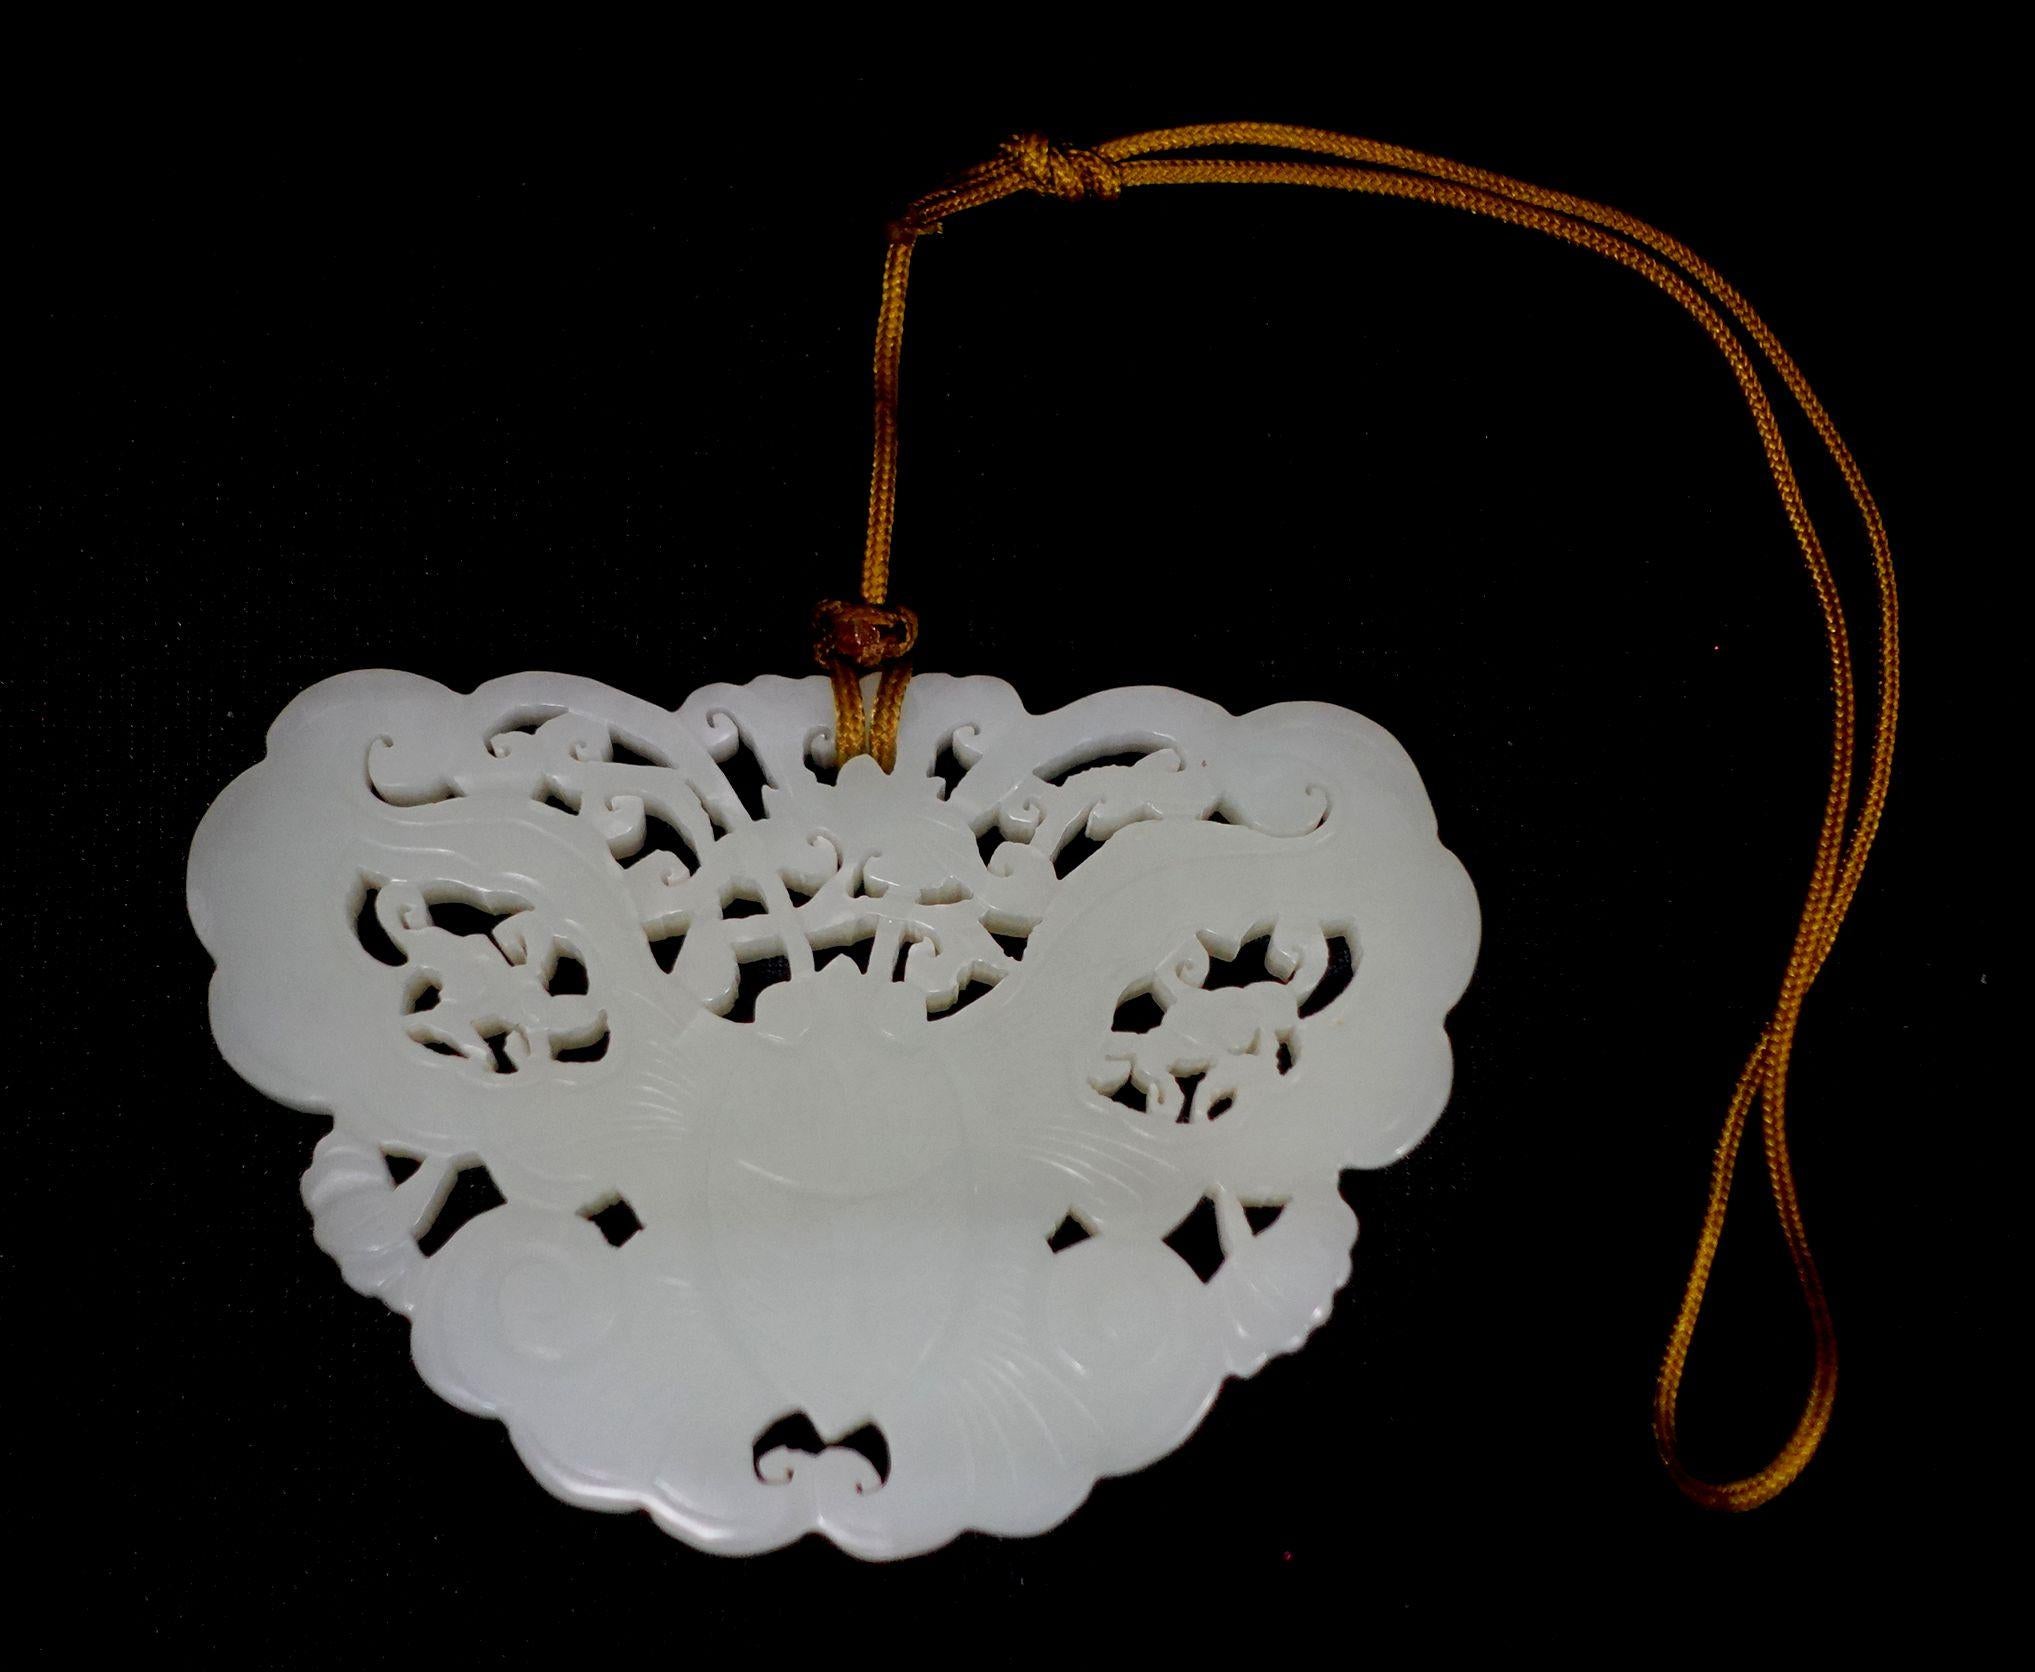 Antique A Chinese Carved Hetain White Jade Pendant, 19th-century.

-Dimensions and Density-

Jade:
Width: 3.5